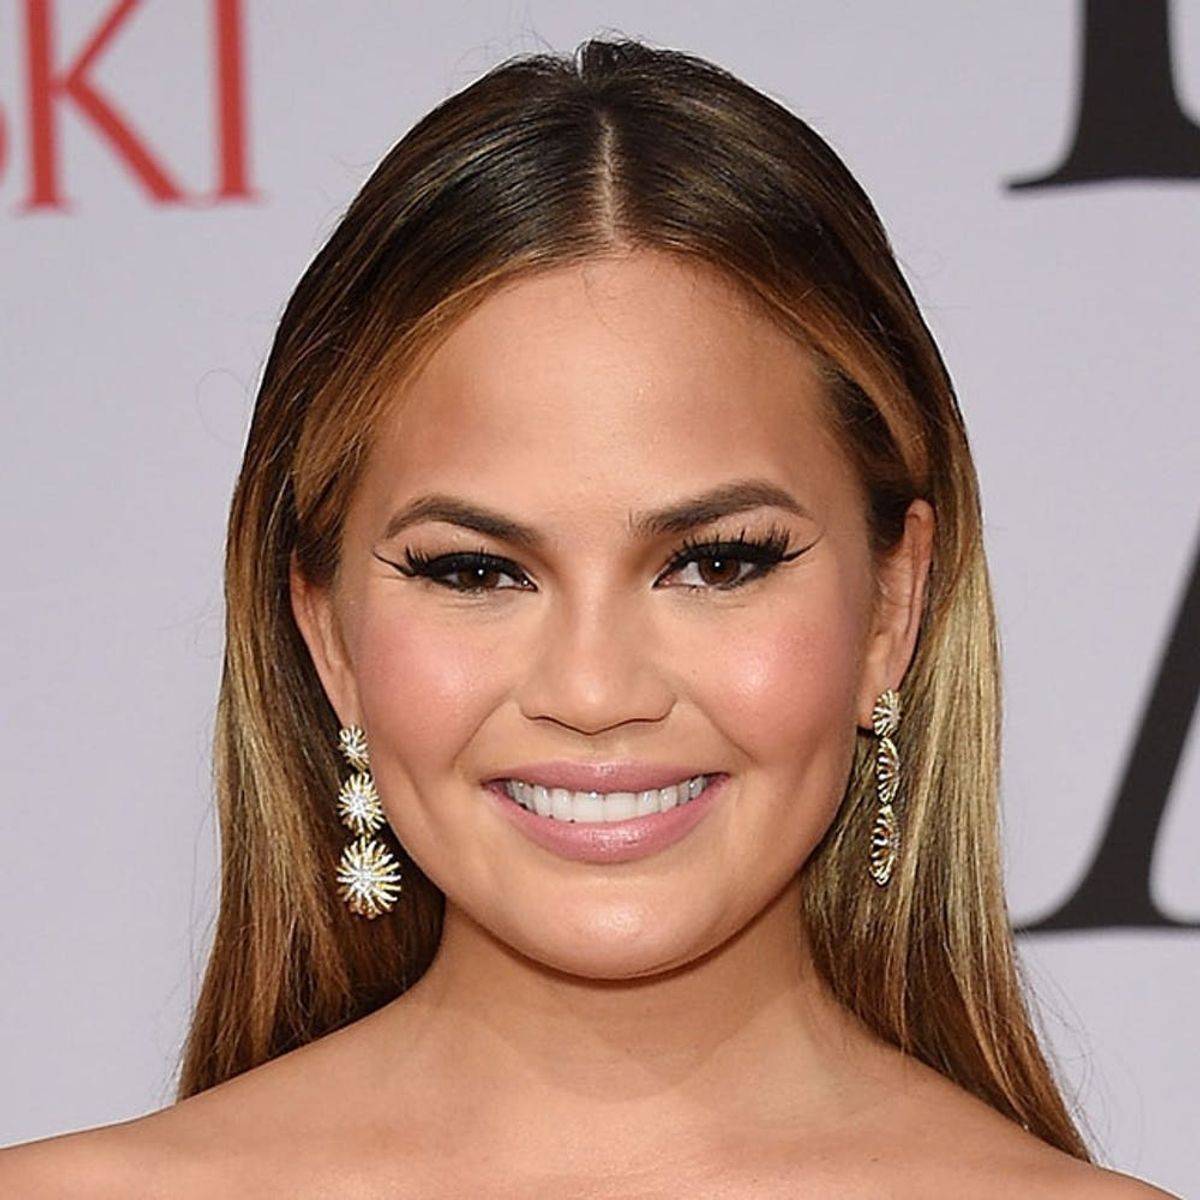 You Need to Know Chrissy Teigen’s Hair Hack Before You Go Out This Weekend